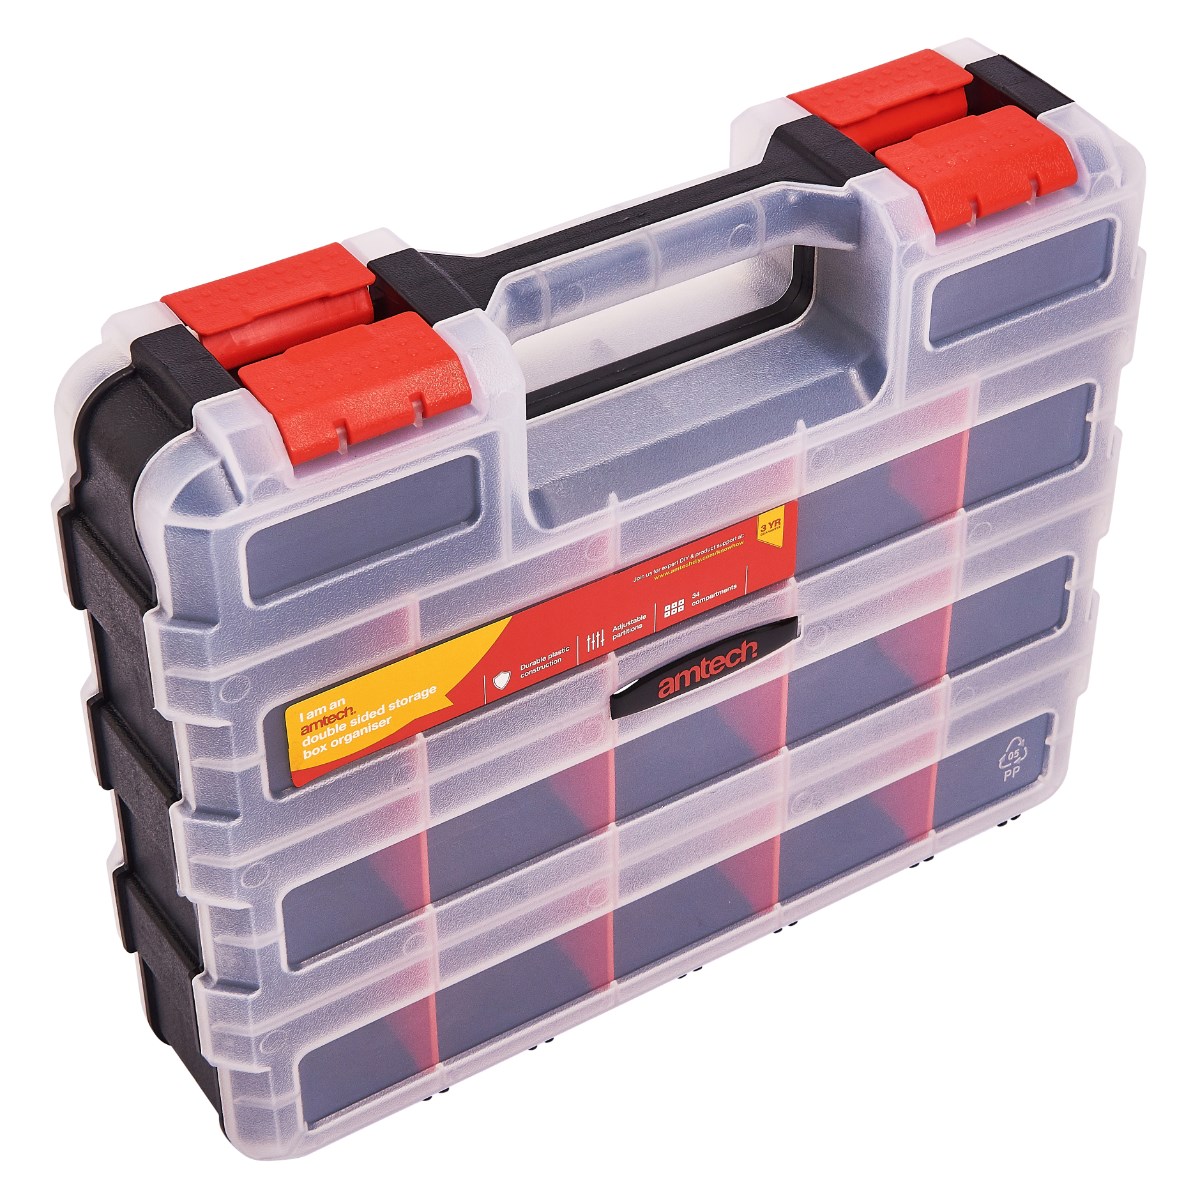 34 Compartment Double Sided Storage Box Organiser Case Tools Parts Work Plastic 